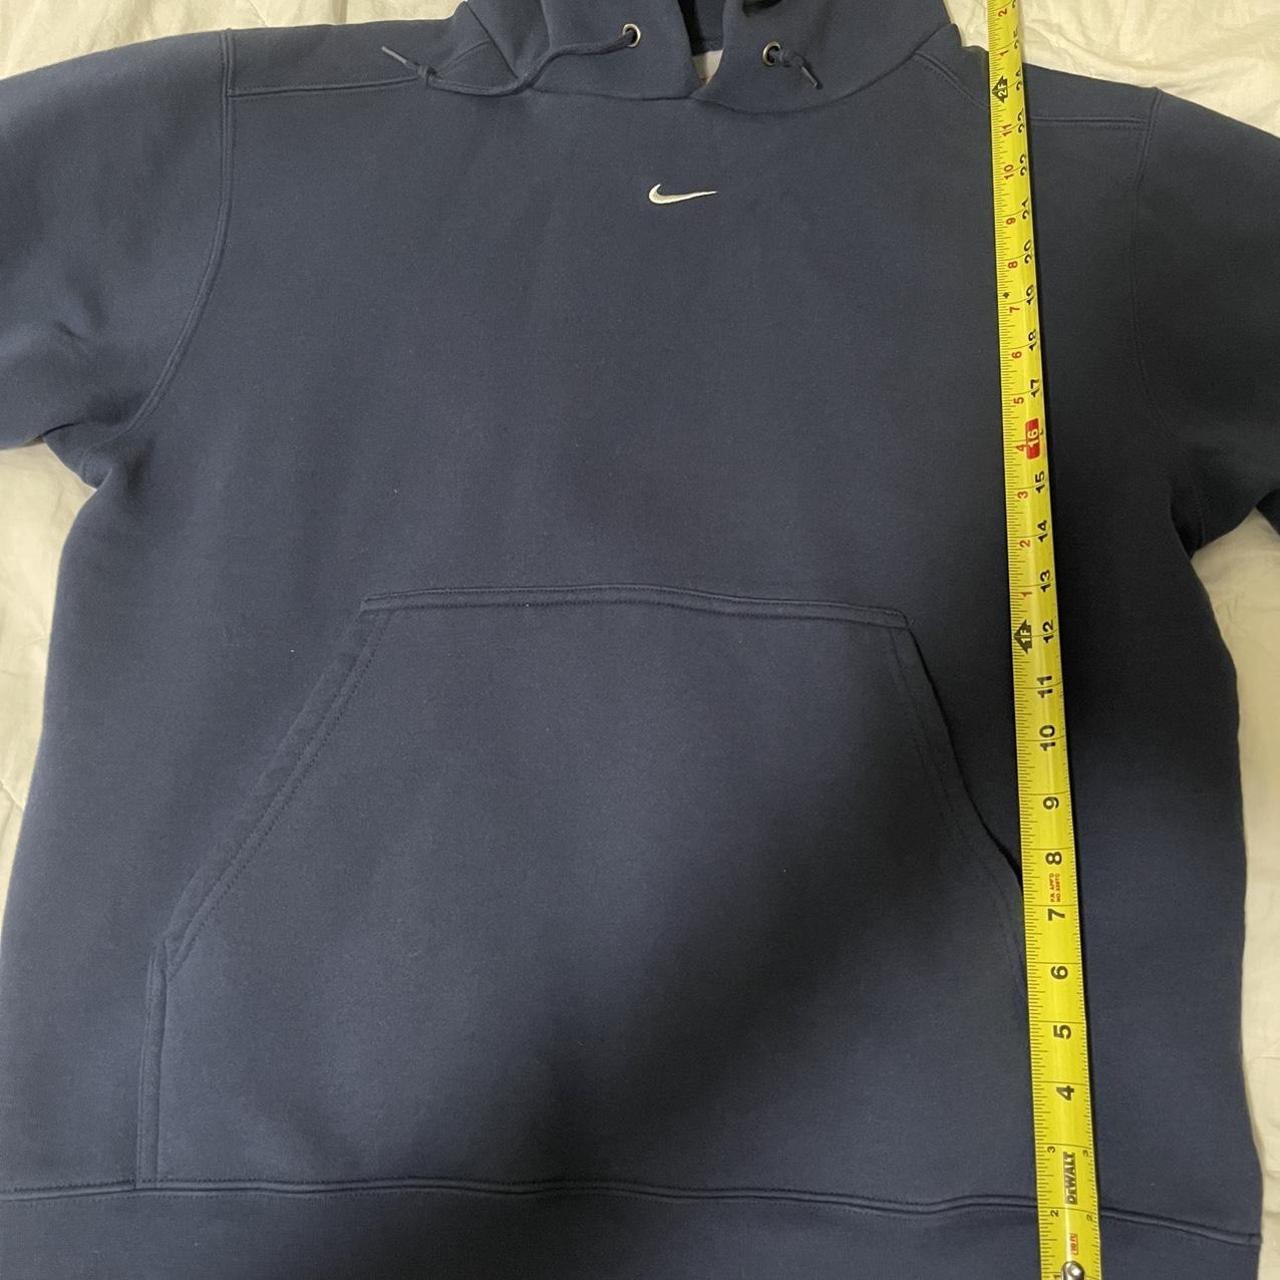 Nike center swoosh REP. Size small fits like a small - Depop